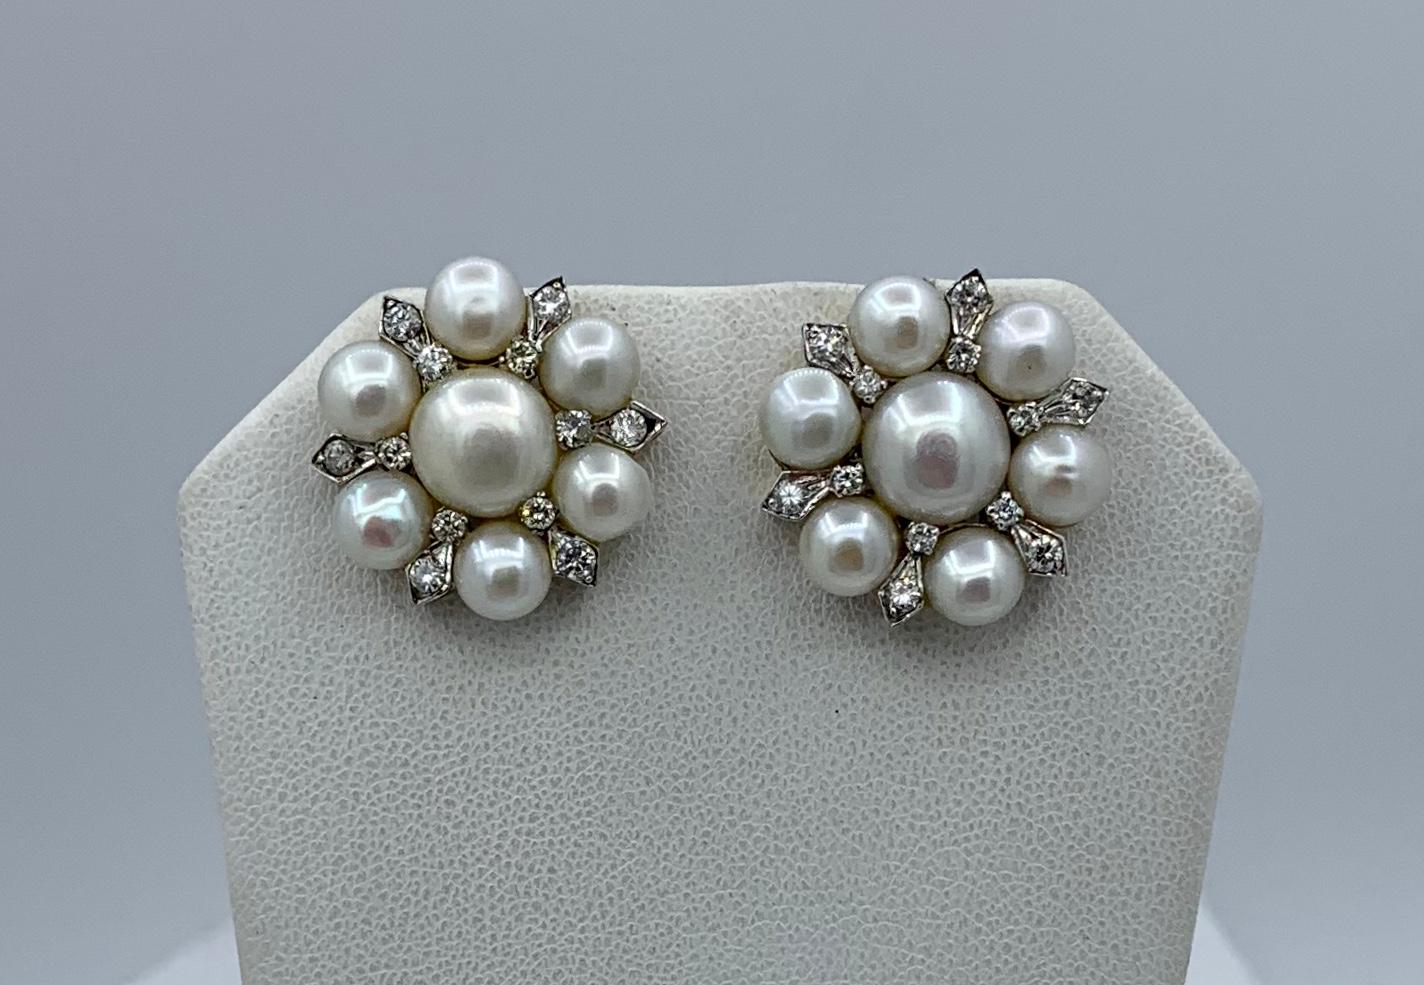 A gorgeous pair of antique Pearl and 24 Diamond Earrings in 14 Karat White Gold.  The Retro Hollywood Regency jewels are beautiful and we have the matching 3 strand Pearl Necklace in another listing.  The Pearls are stunning with beautiful nacre and